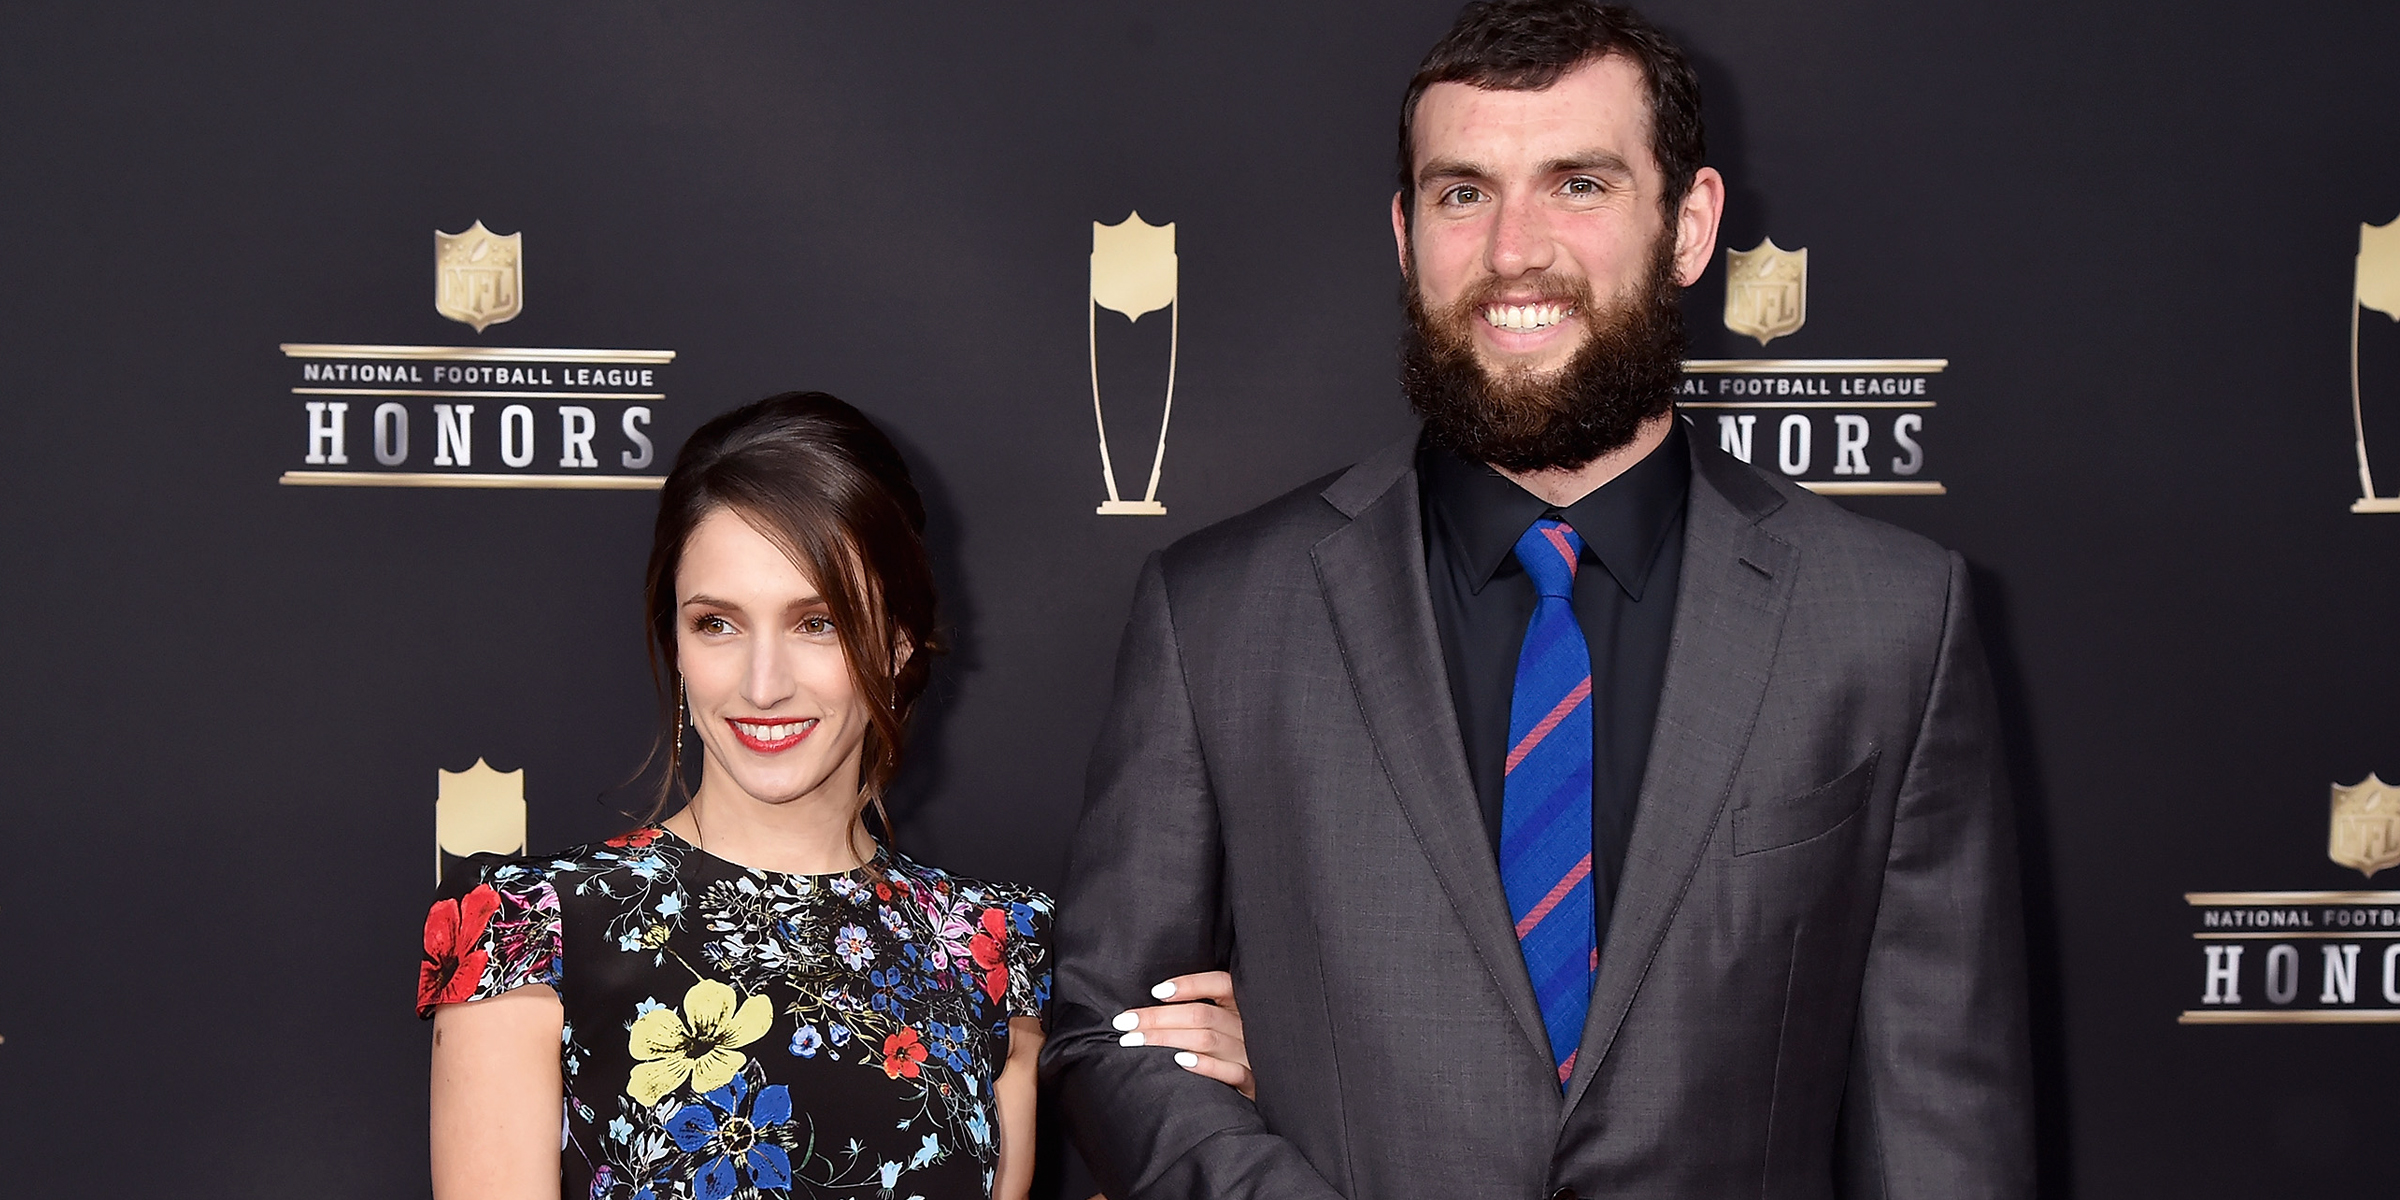 Nicole Pechanec and Andrew Luck. | Source: Getty Images